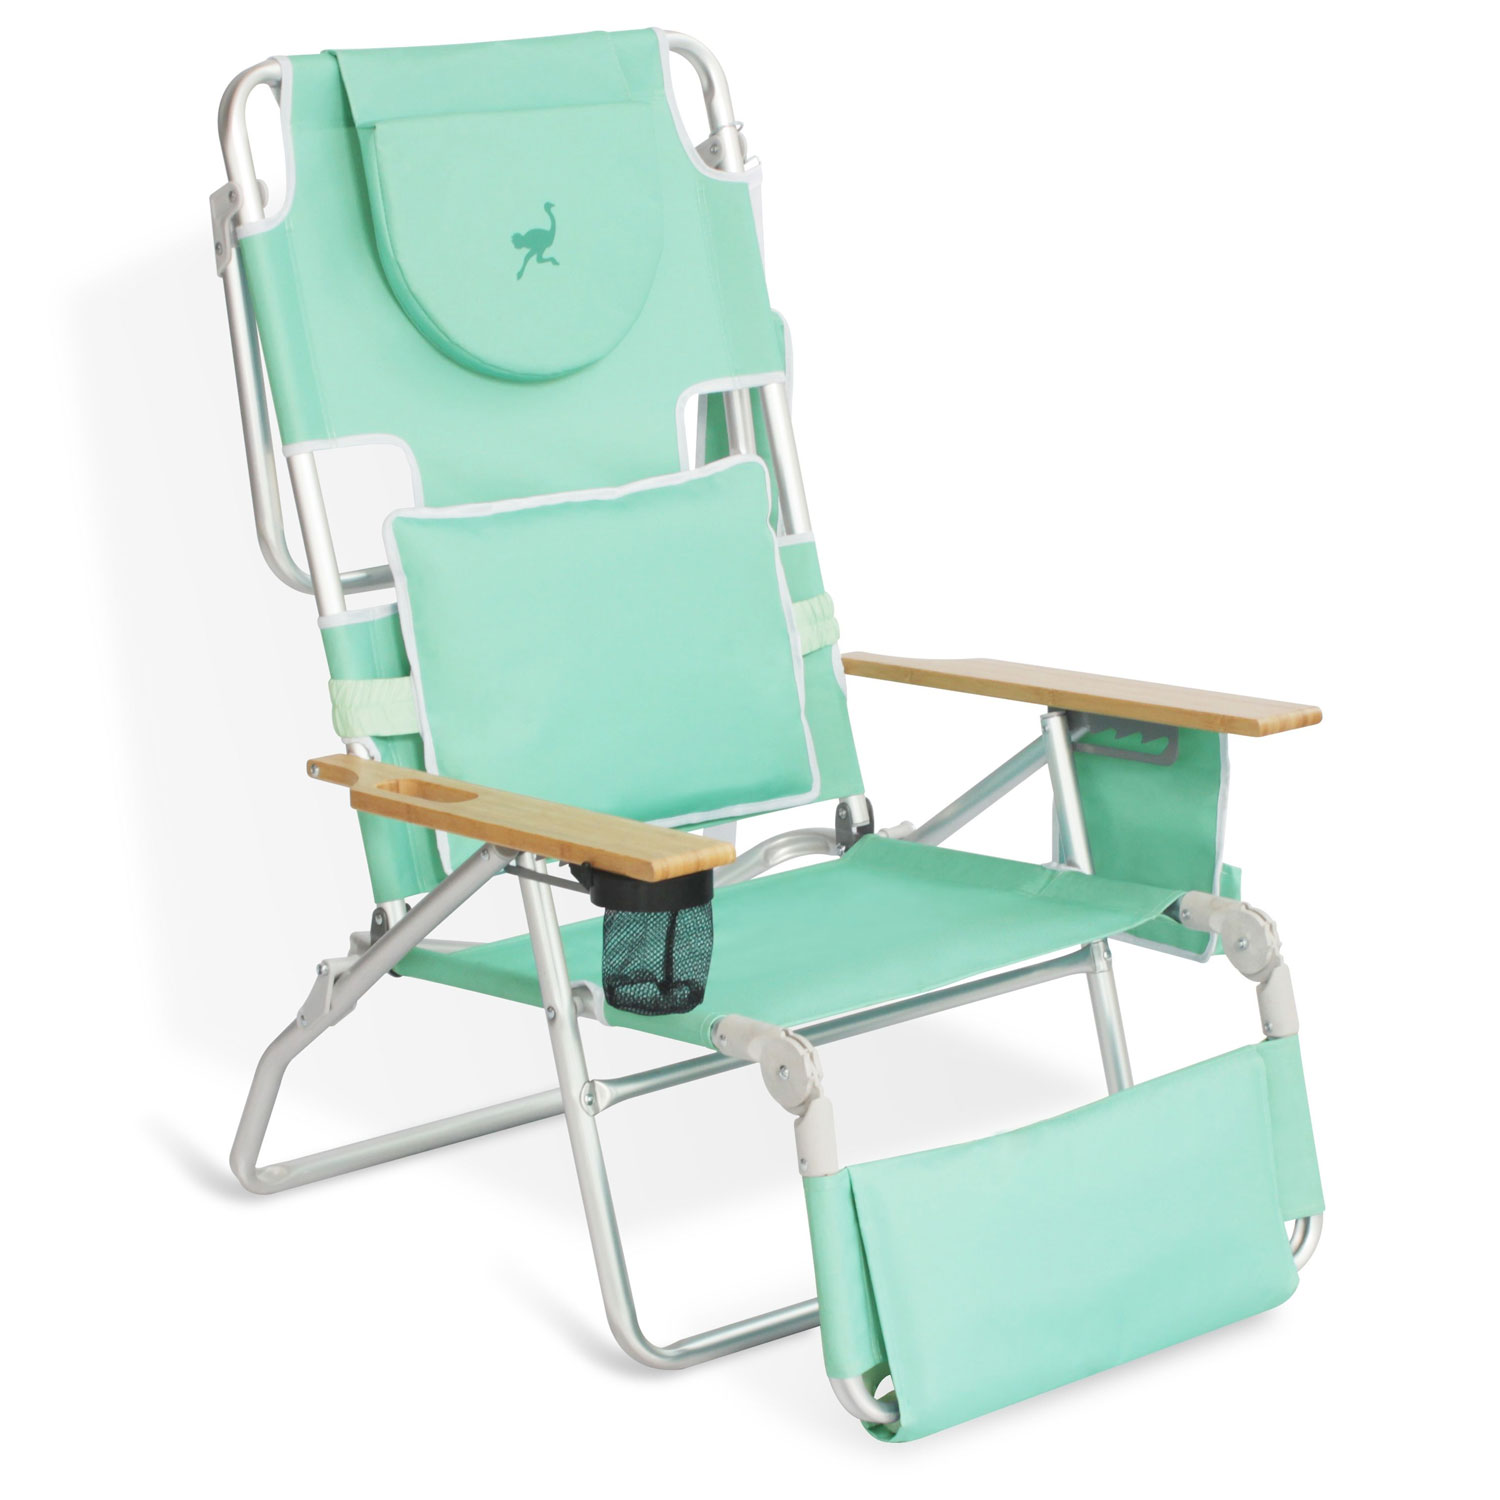 New Roman Folding Beach Chair for Small Space